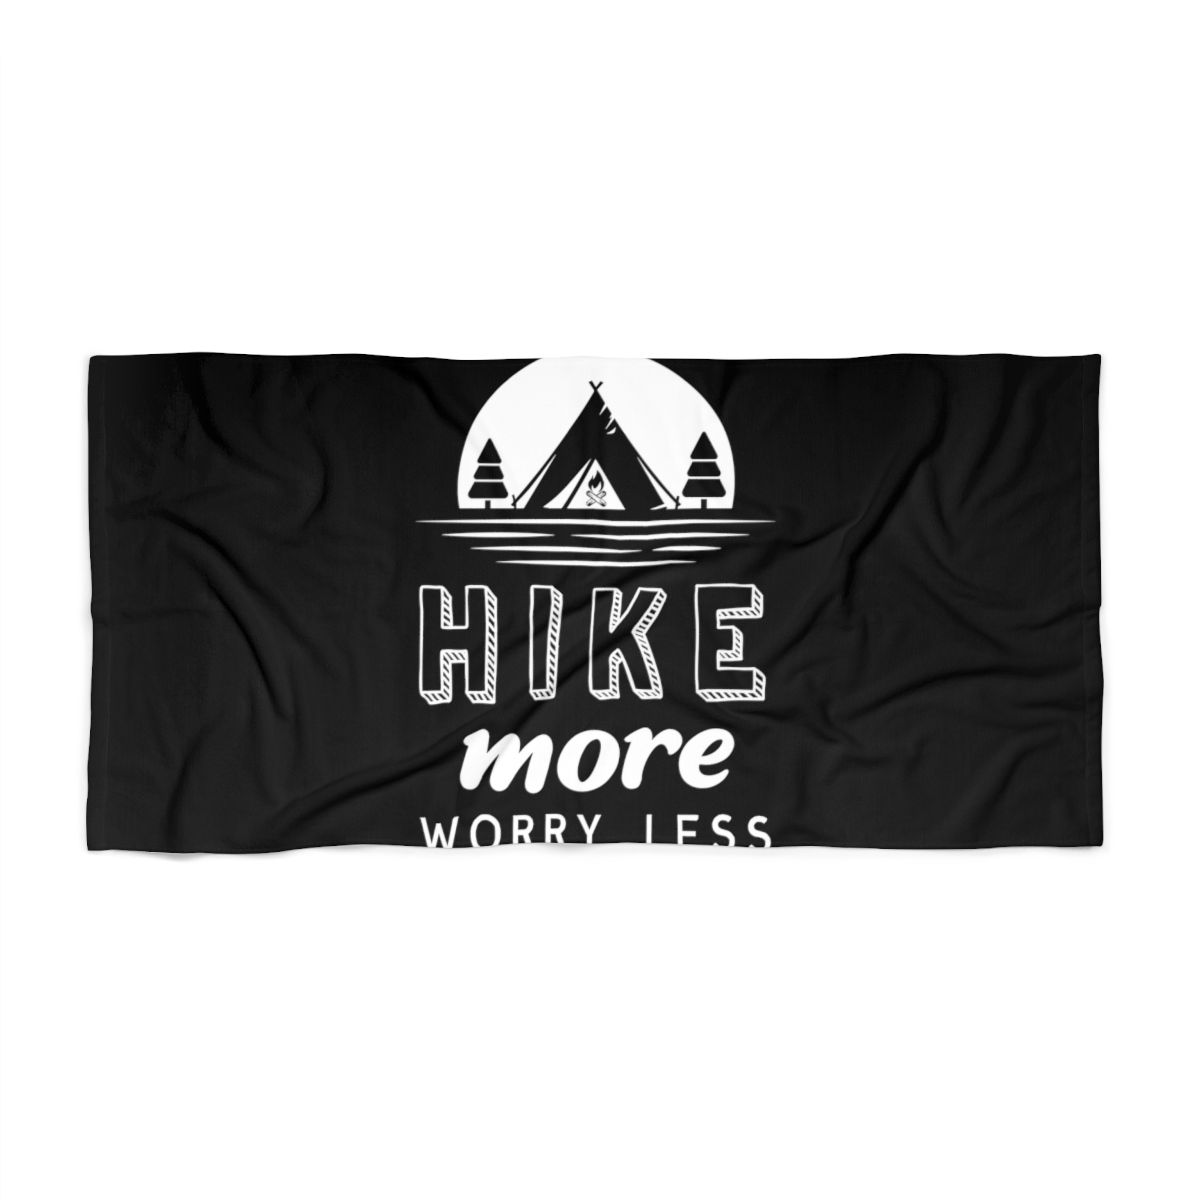 Hike More Worry Less Personalized Beach Towel: Soft, Durable, One-Sided Print - $37.08 - $46.35